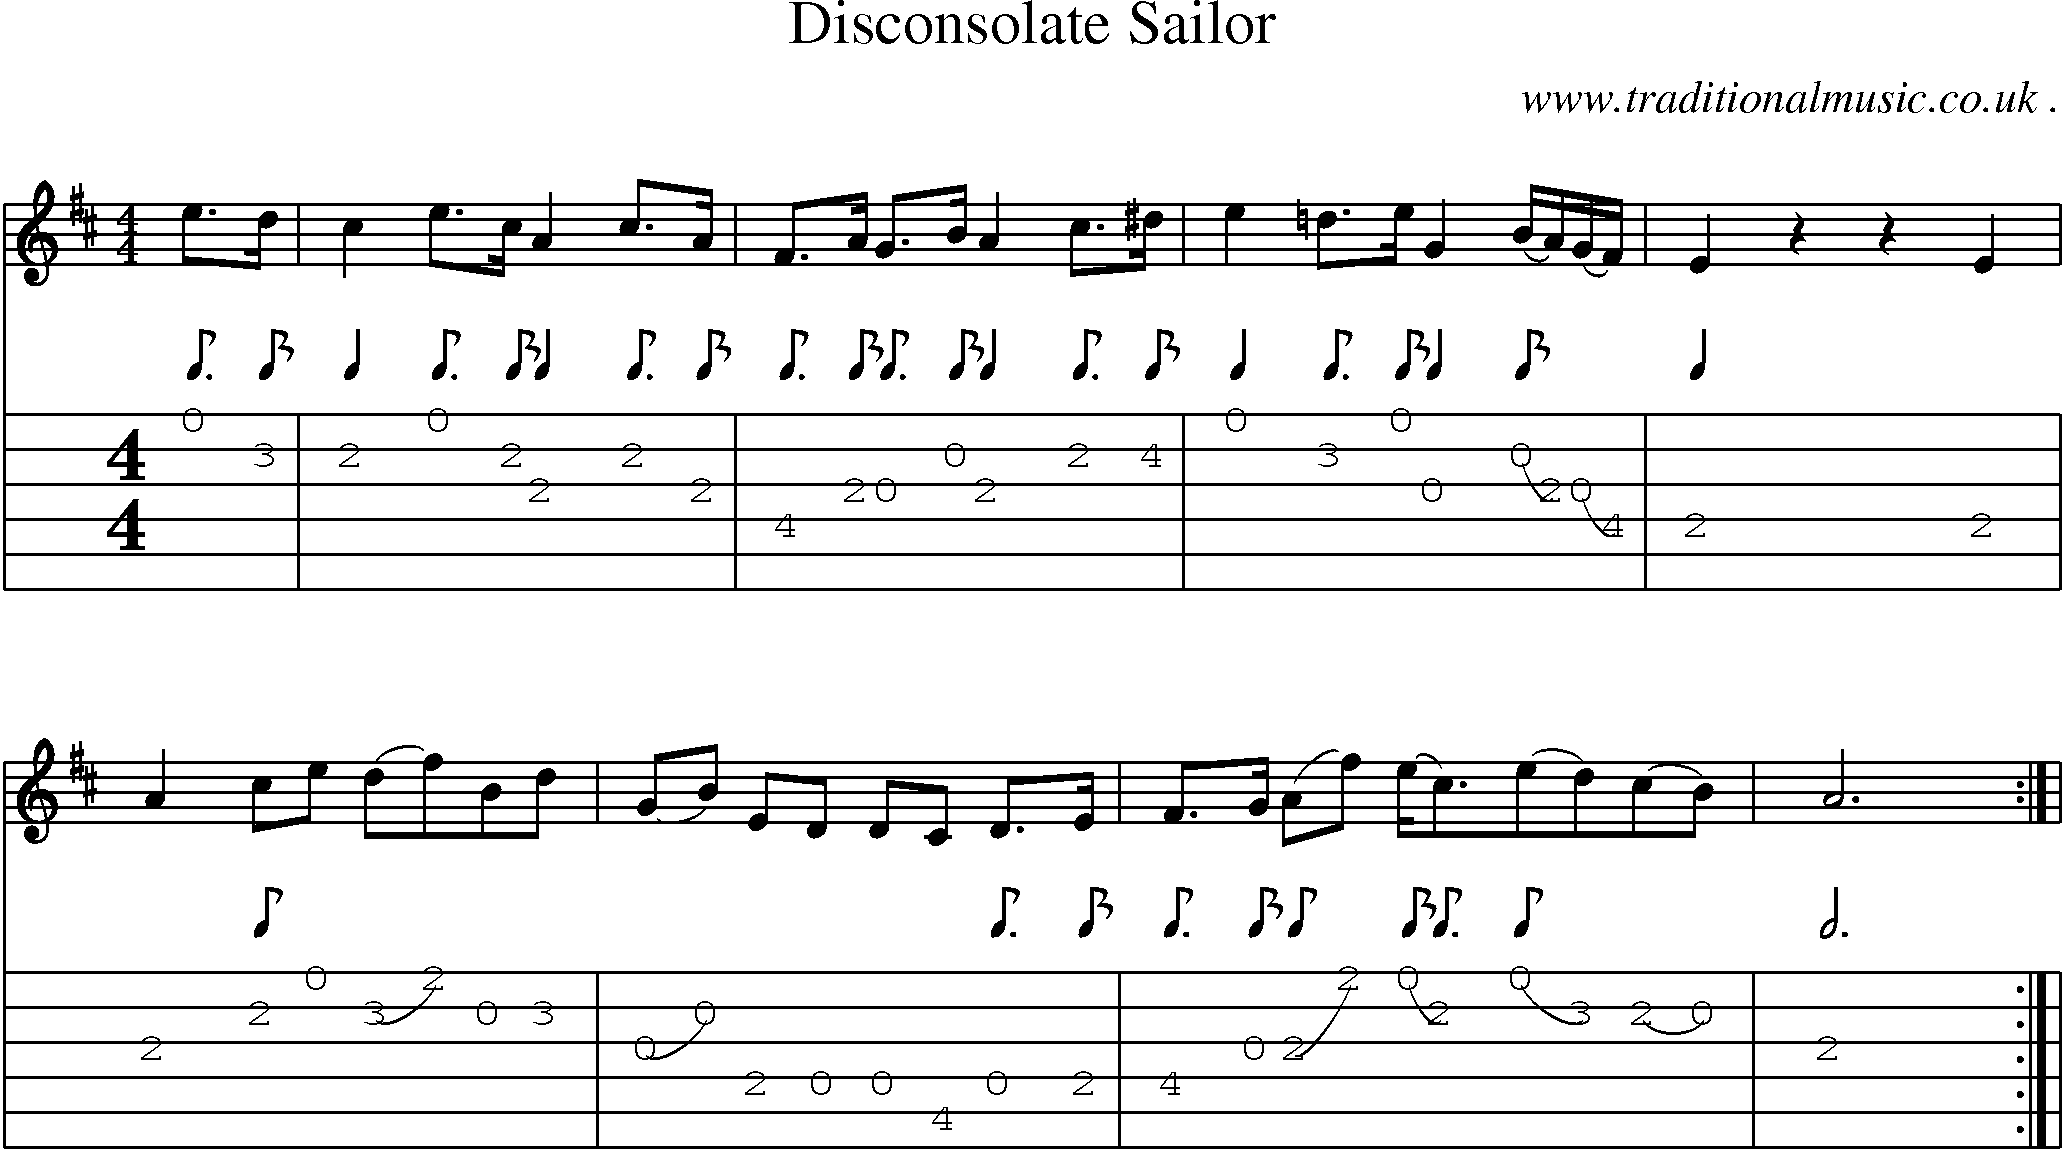 Sheet-Music and Guitar Tabs for Disconsolate Sailor